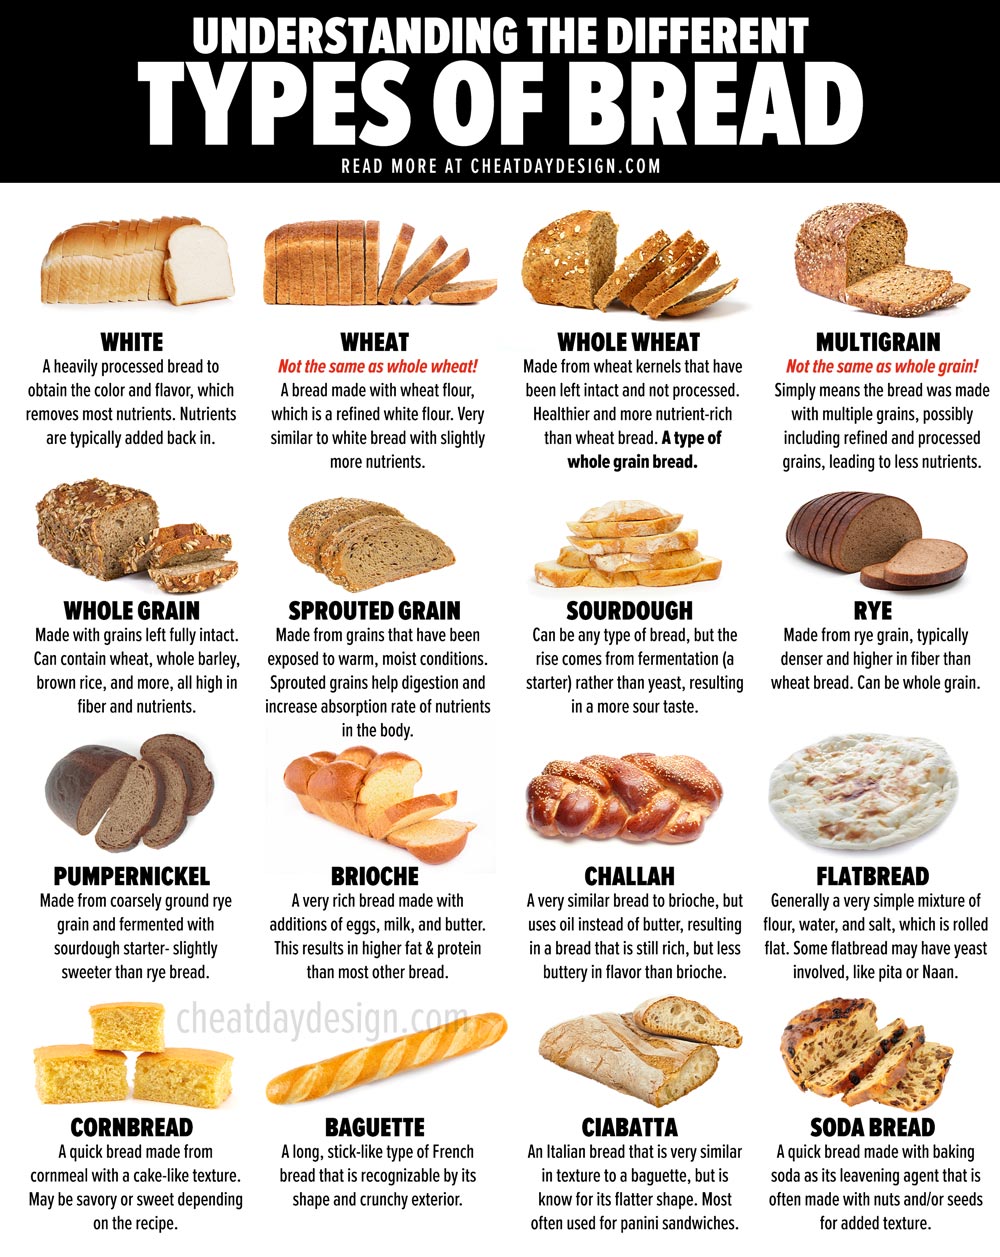 I. Introduction to Different Types of Bread